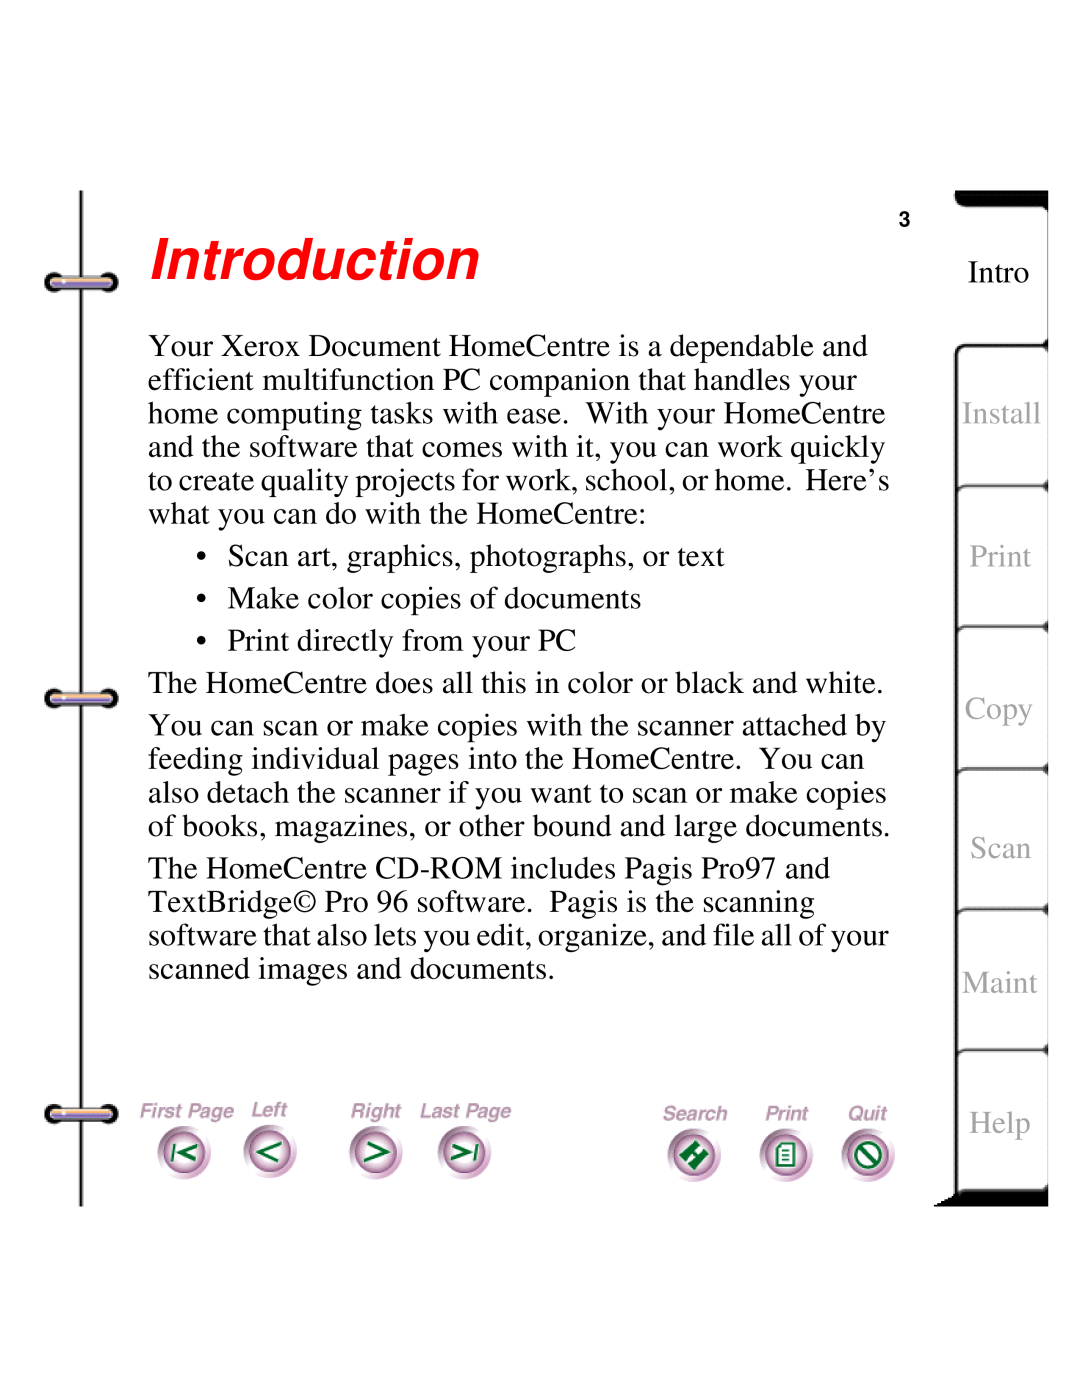 Xerox Document HomeCentre manual Introduction, Install Print Copy Scan Maint, Help 